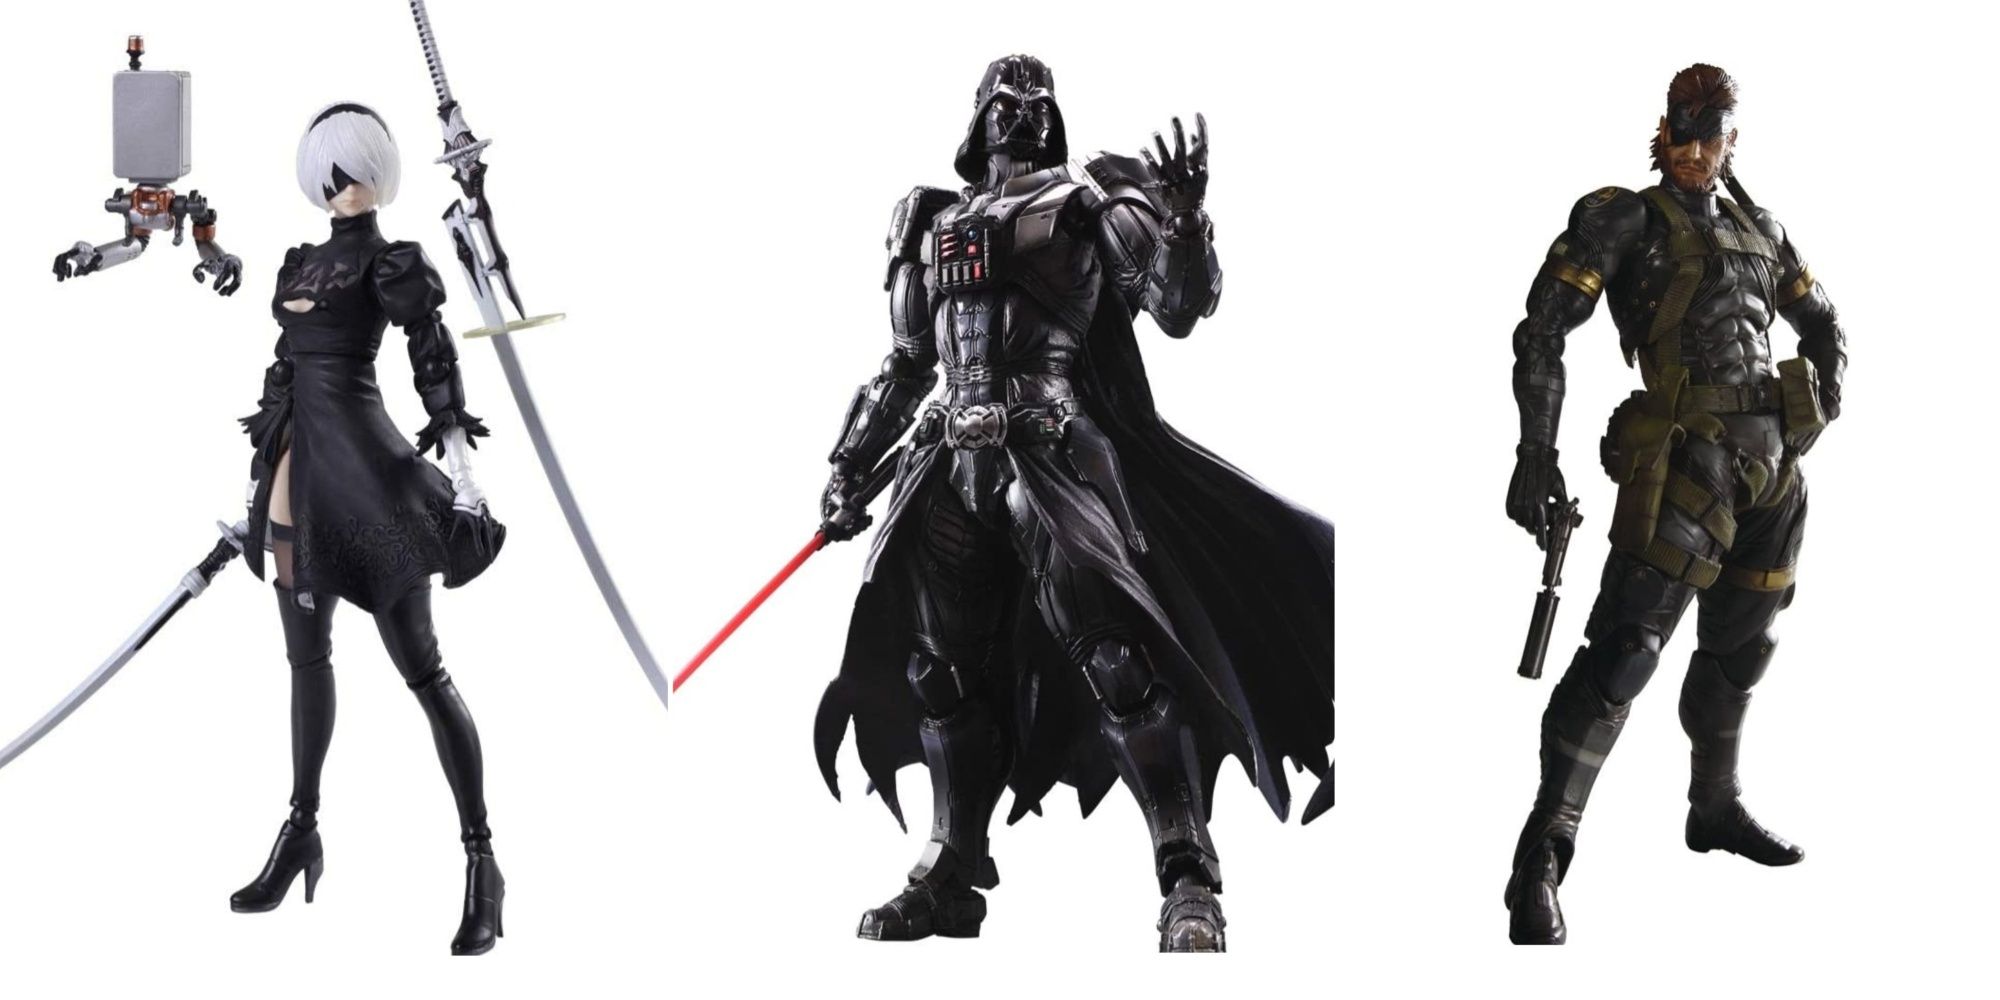 Play Arts Kai action figures featuring 2B, Darth Vader, and Naked Snake